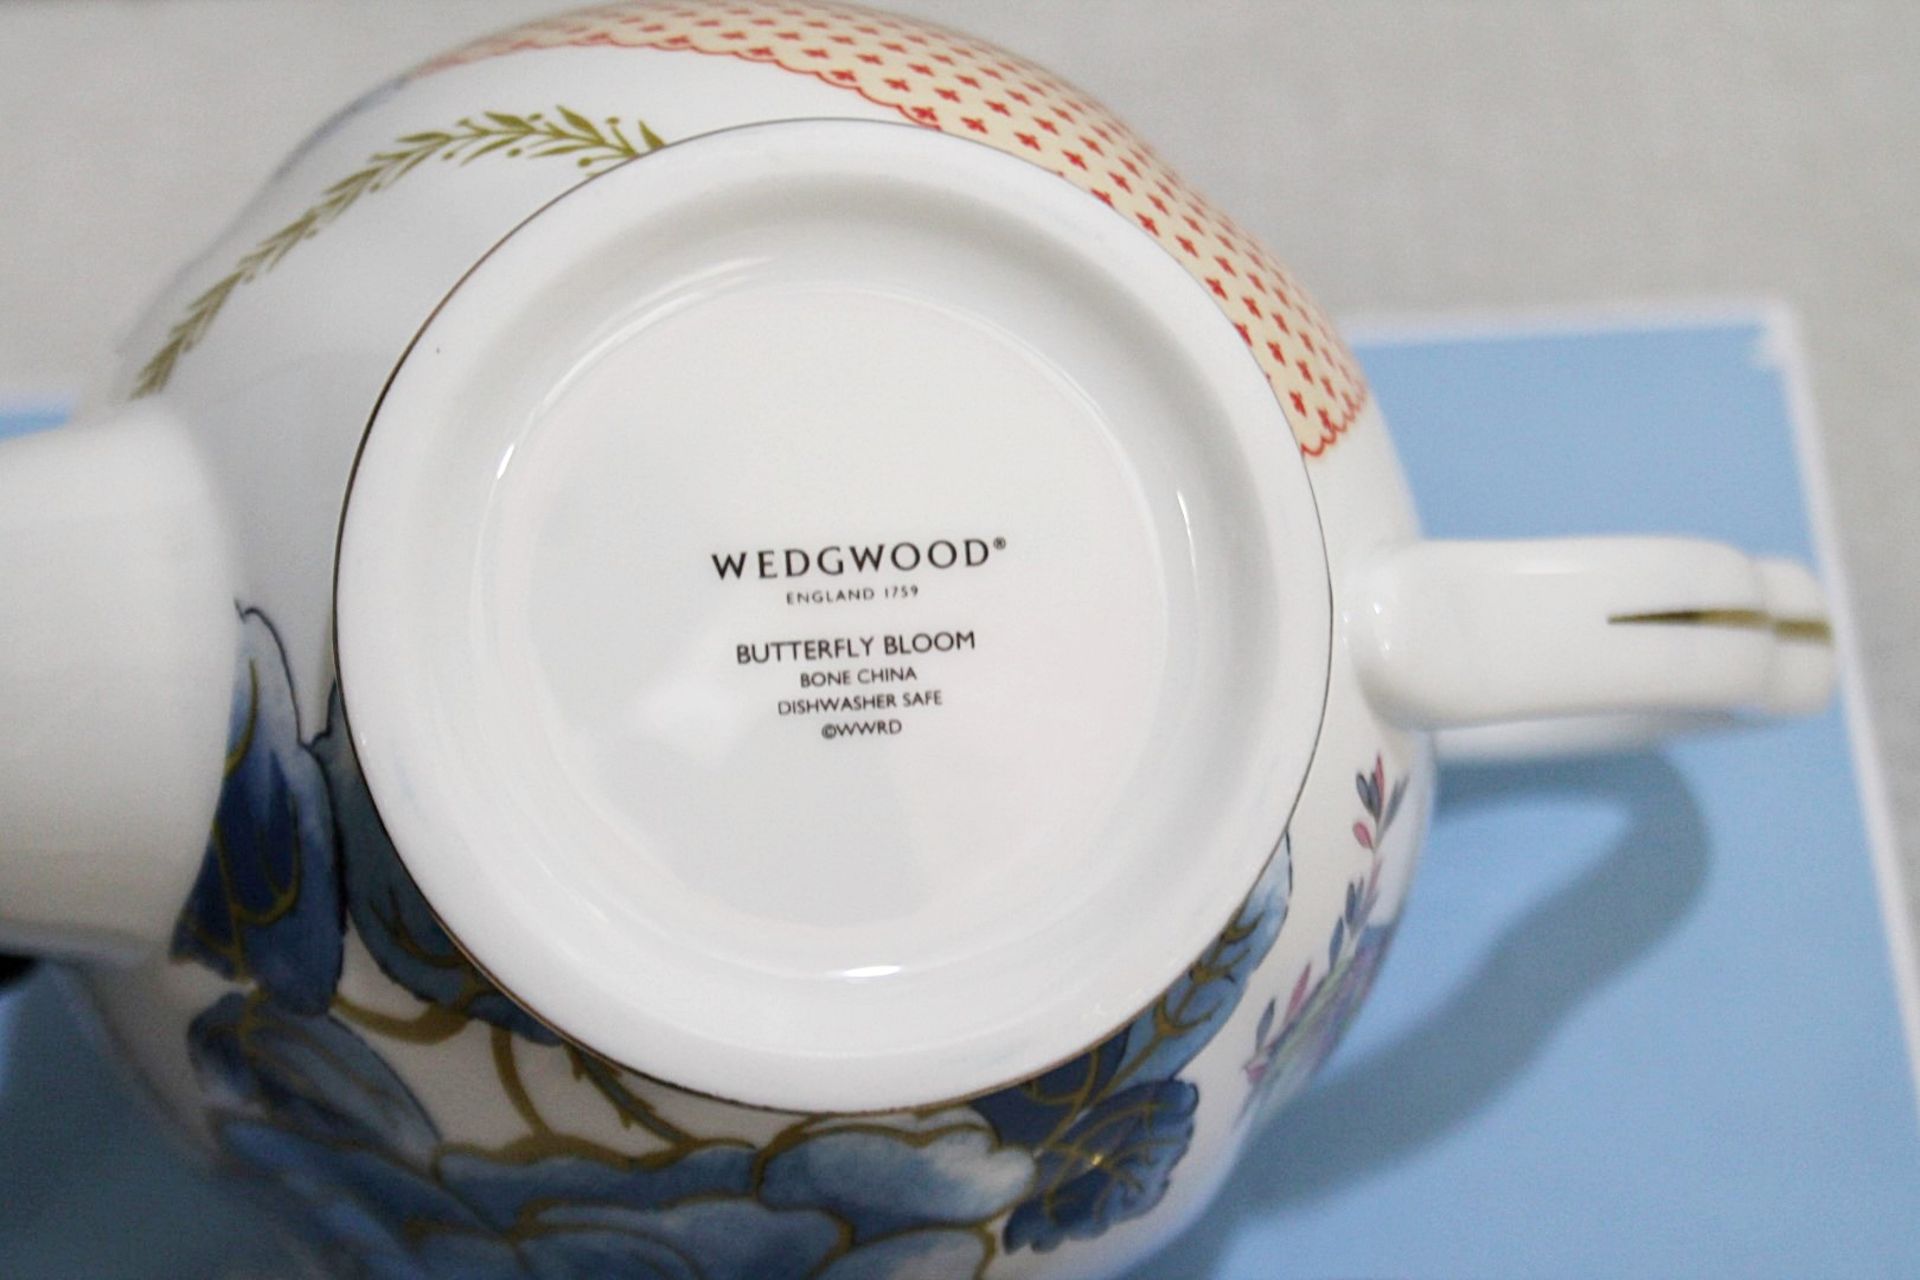 1 x WEDGWOOD 'Butterfly Bloom' Fine Bone China Teapot, Creamer And Sugar Bowl Set - RRP £195.00 - Image 5 of 8